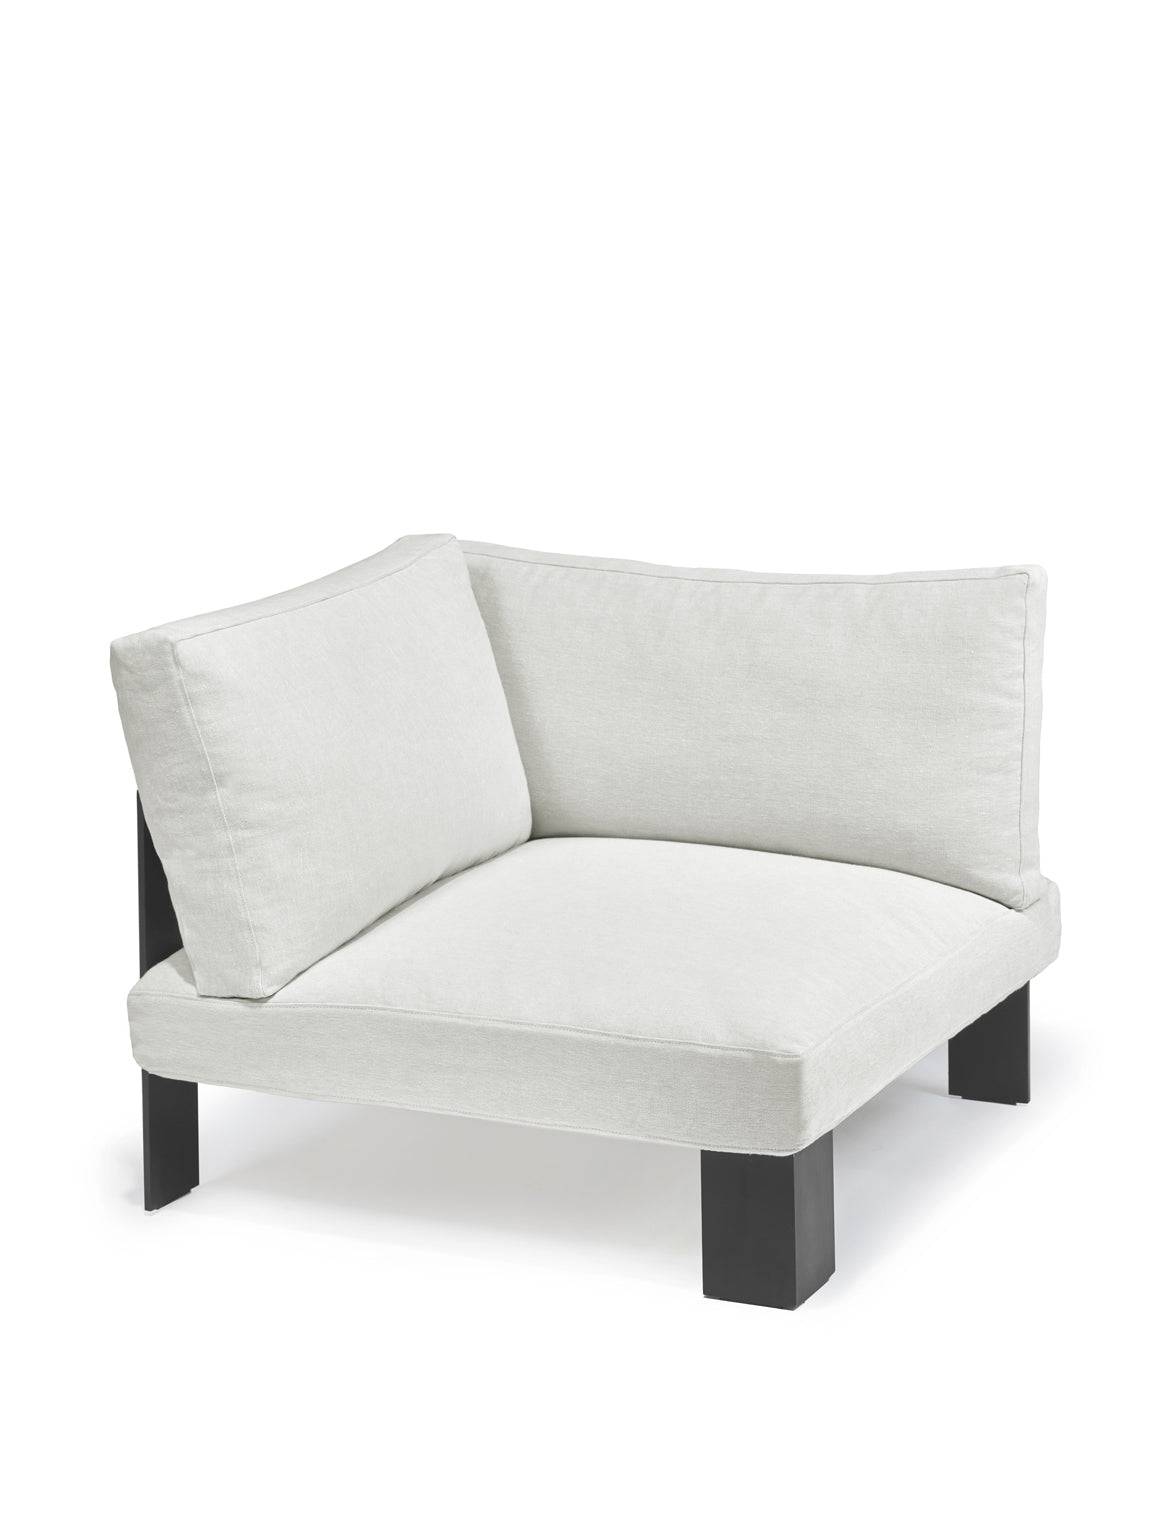 Mombaers Outdoor Sofa - Snow White - THAT COOL LIVING